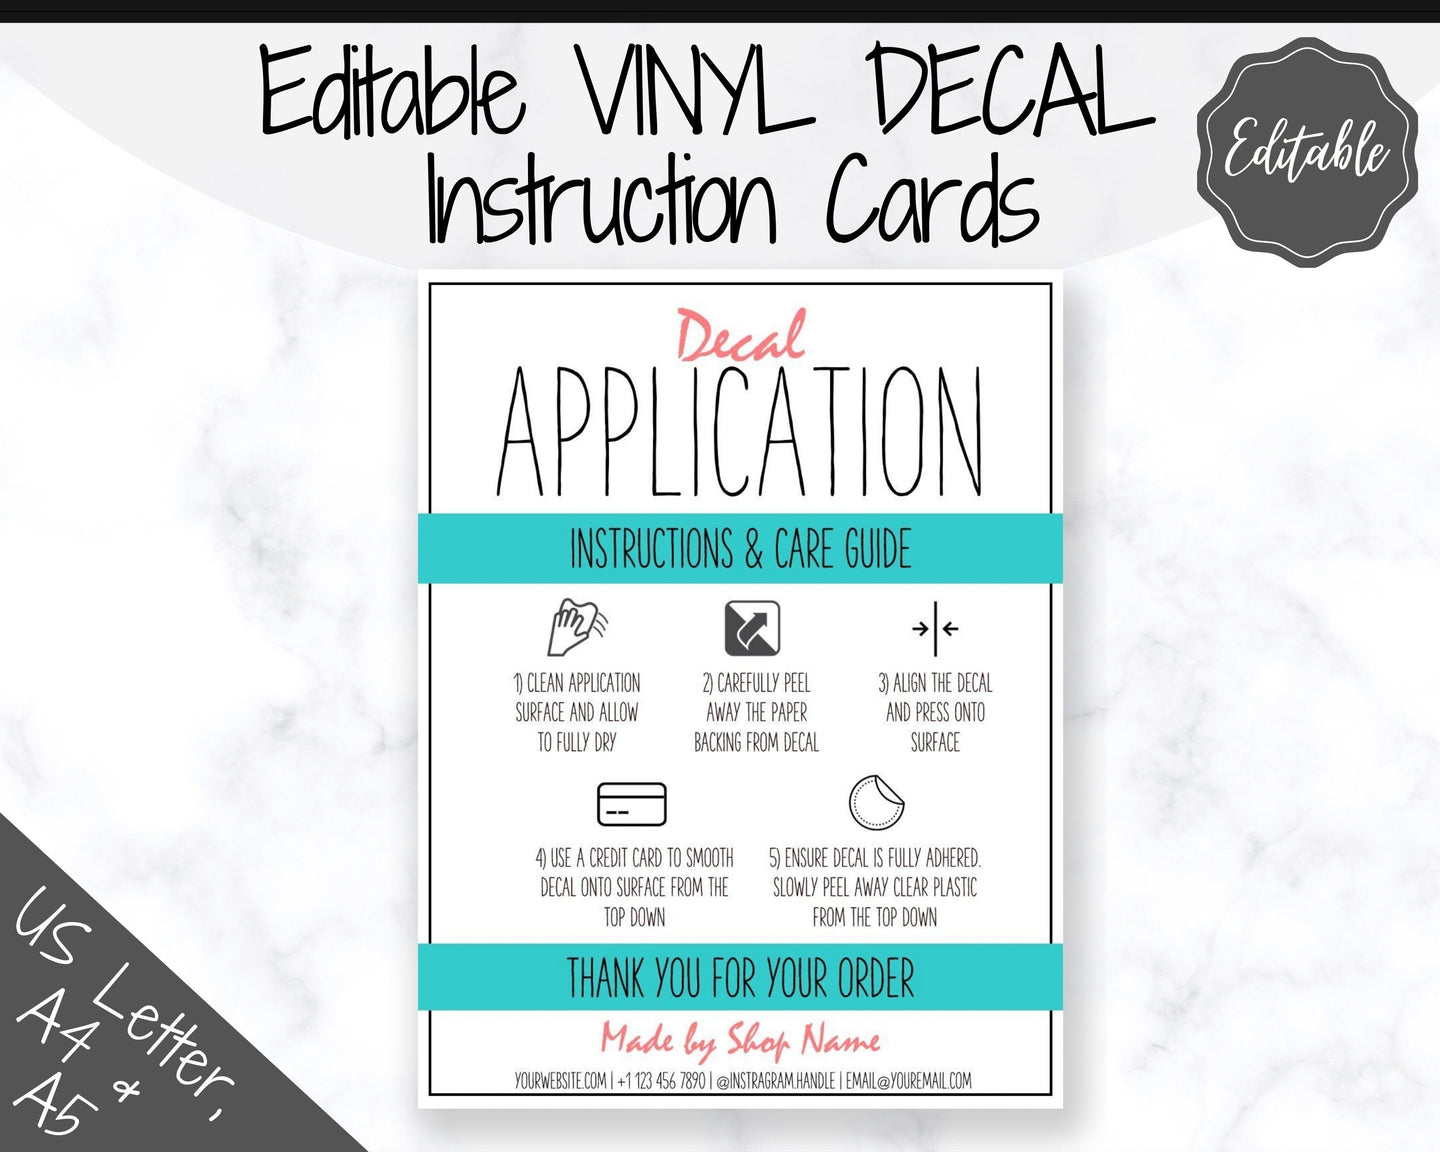 EDITABLE Vinyl Decal Care Card Instructions, Printable Decal Application Order Card, DIY Sticker Seller Packaging Label, Care Cards | Teal & Red